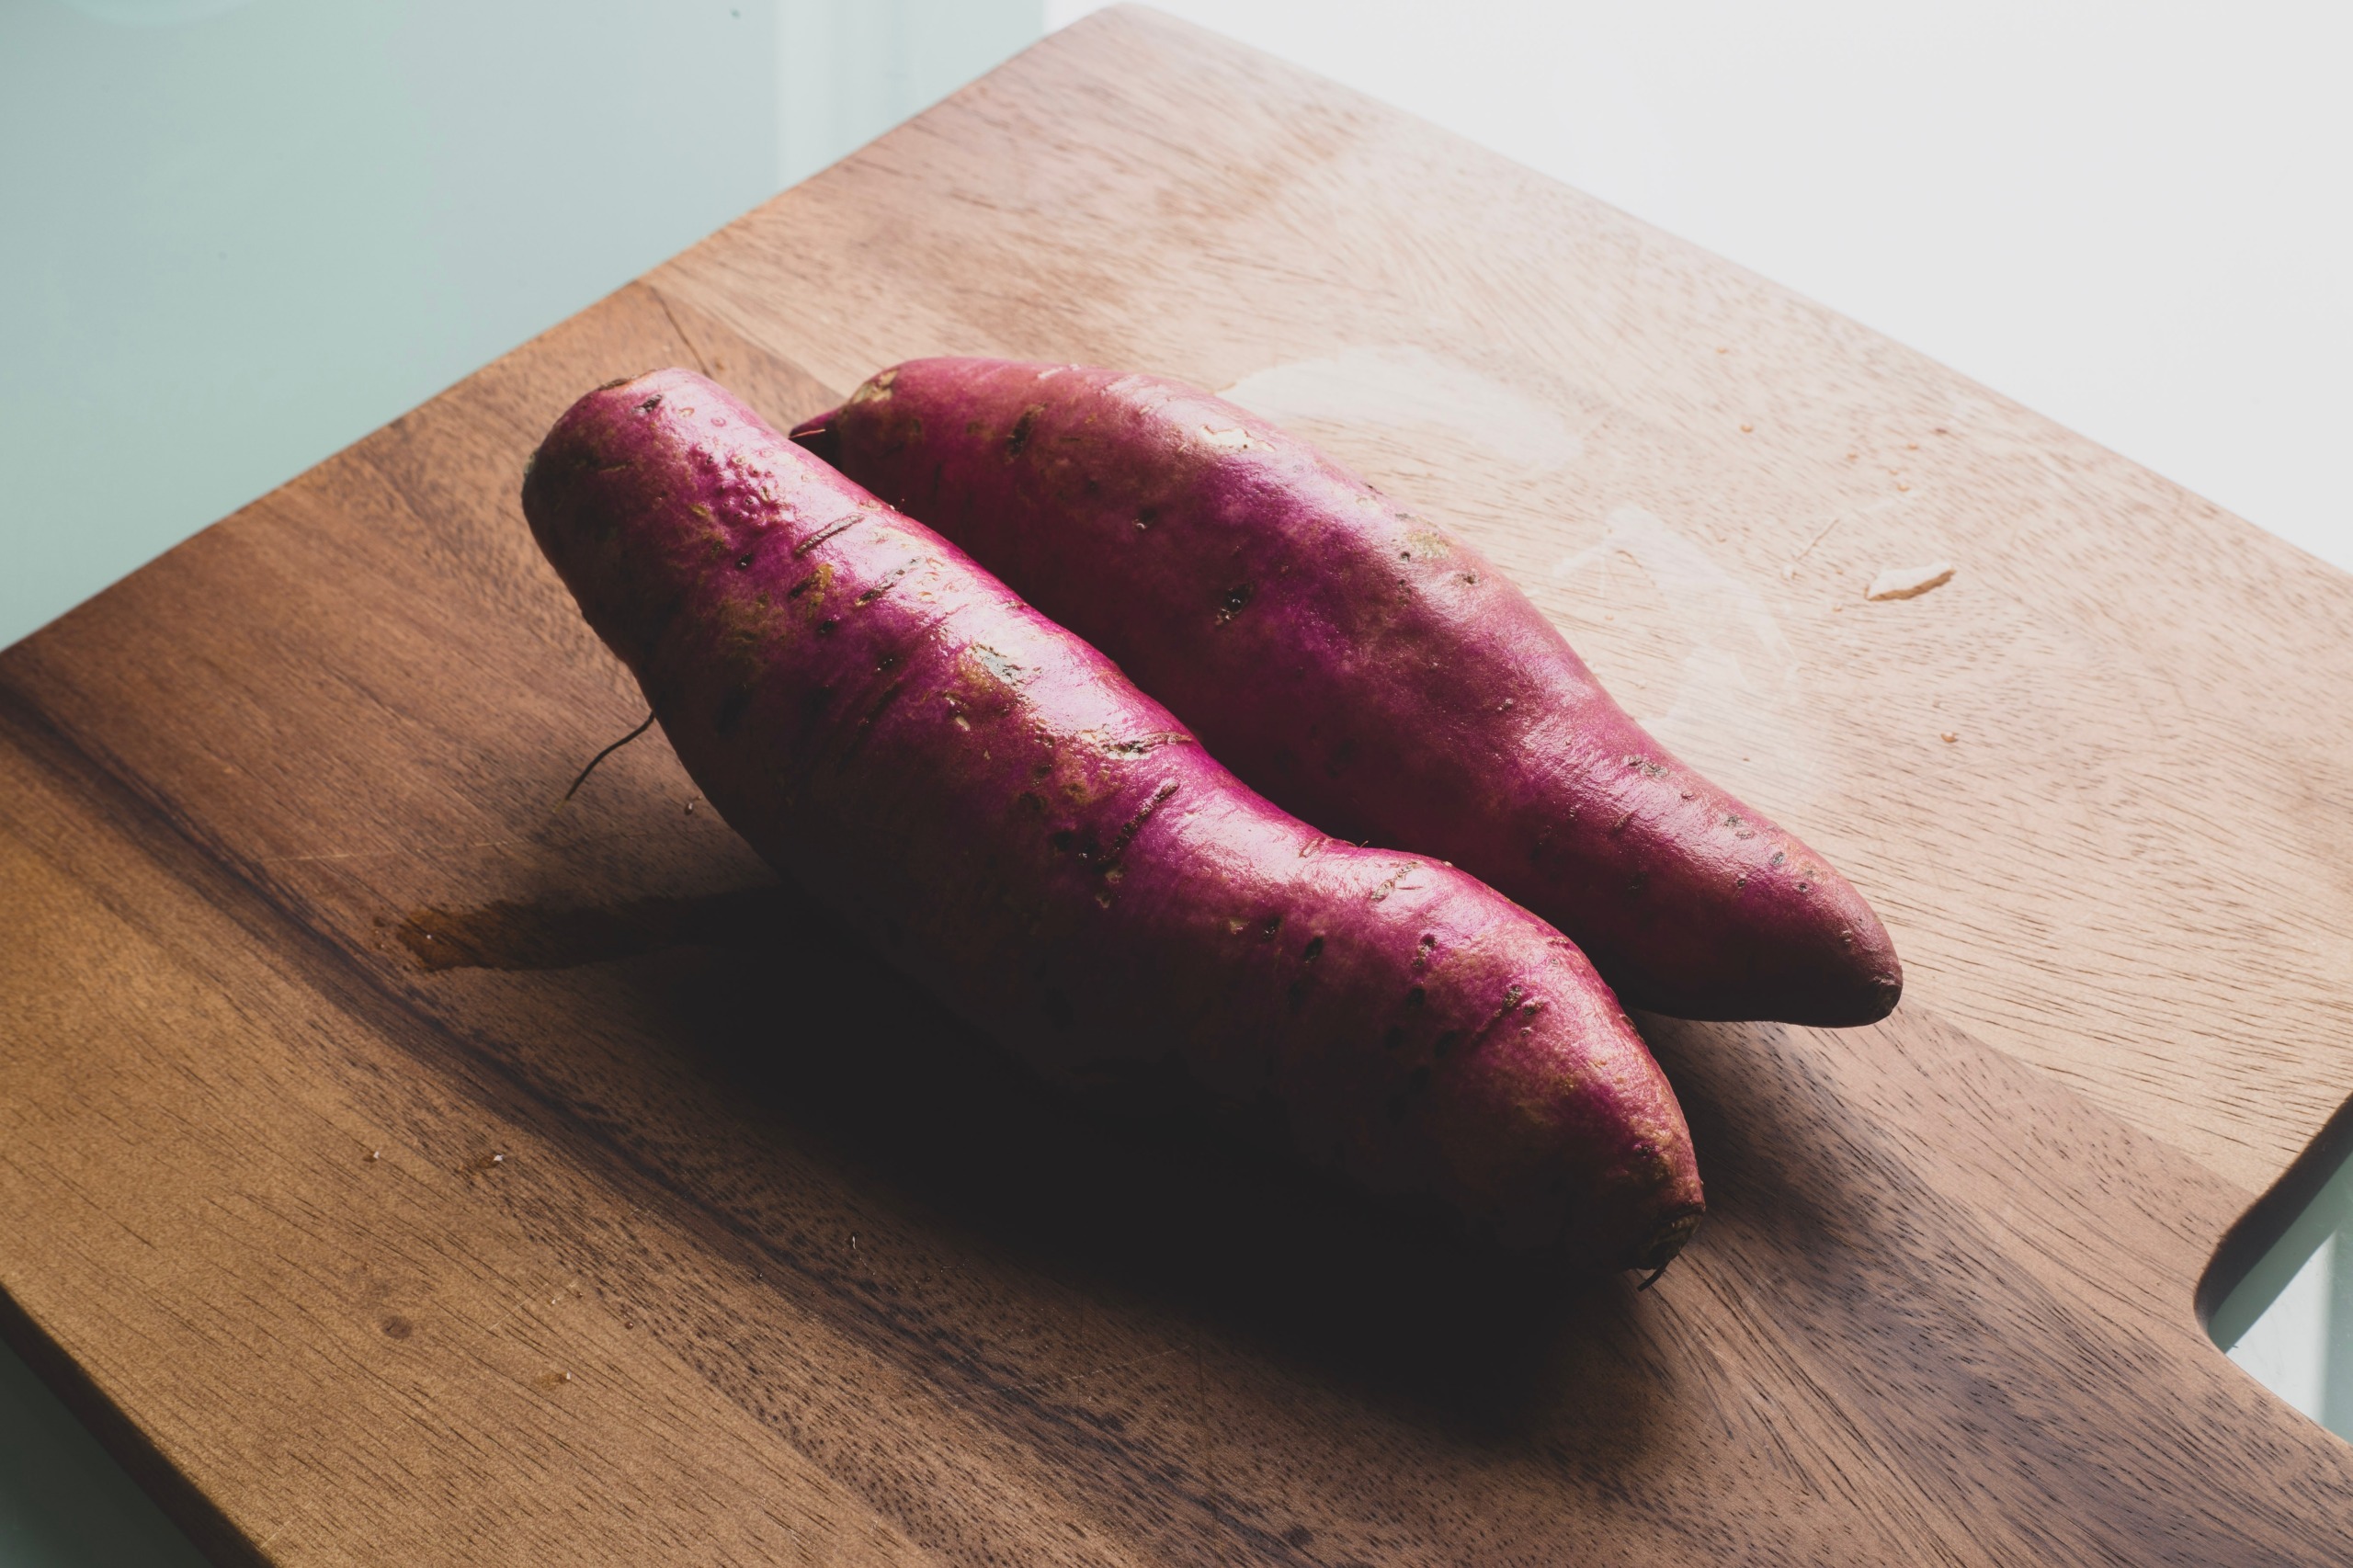 chilled-baked-sweet-potato-is-effective-for-dieting